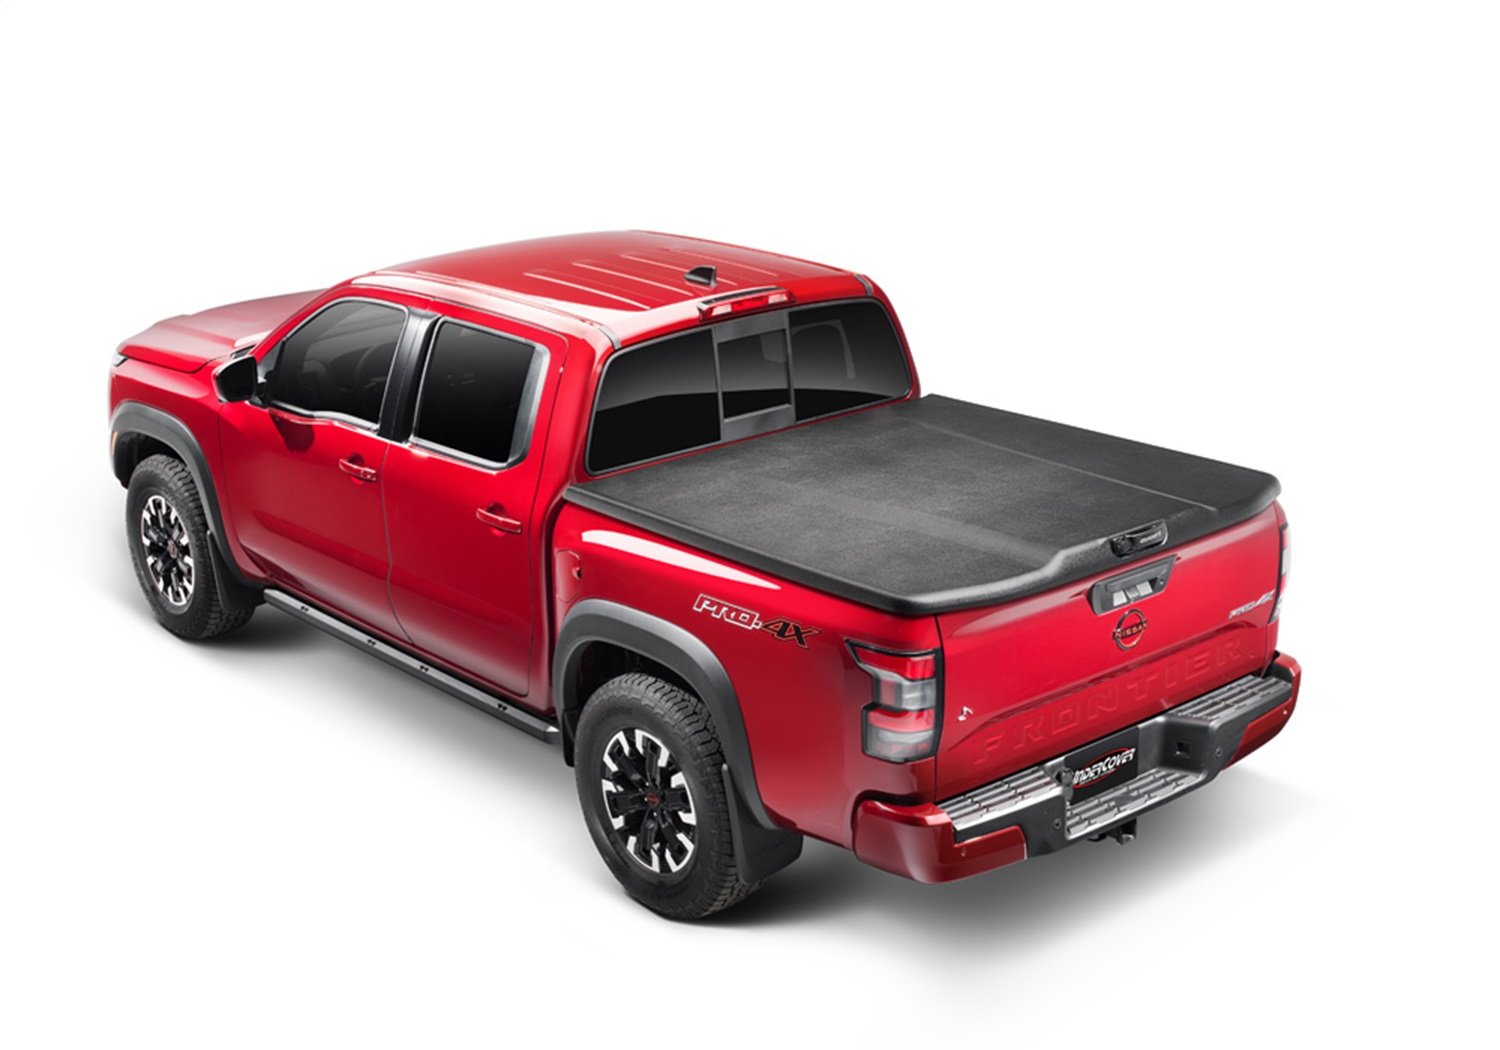 UC5098 Elite Hard Non-Folding Cover, Fits Select Nissan Frontier 5'Bed w/ or w/o Utili-Track System, Black Textured